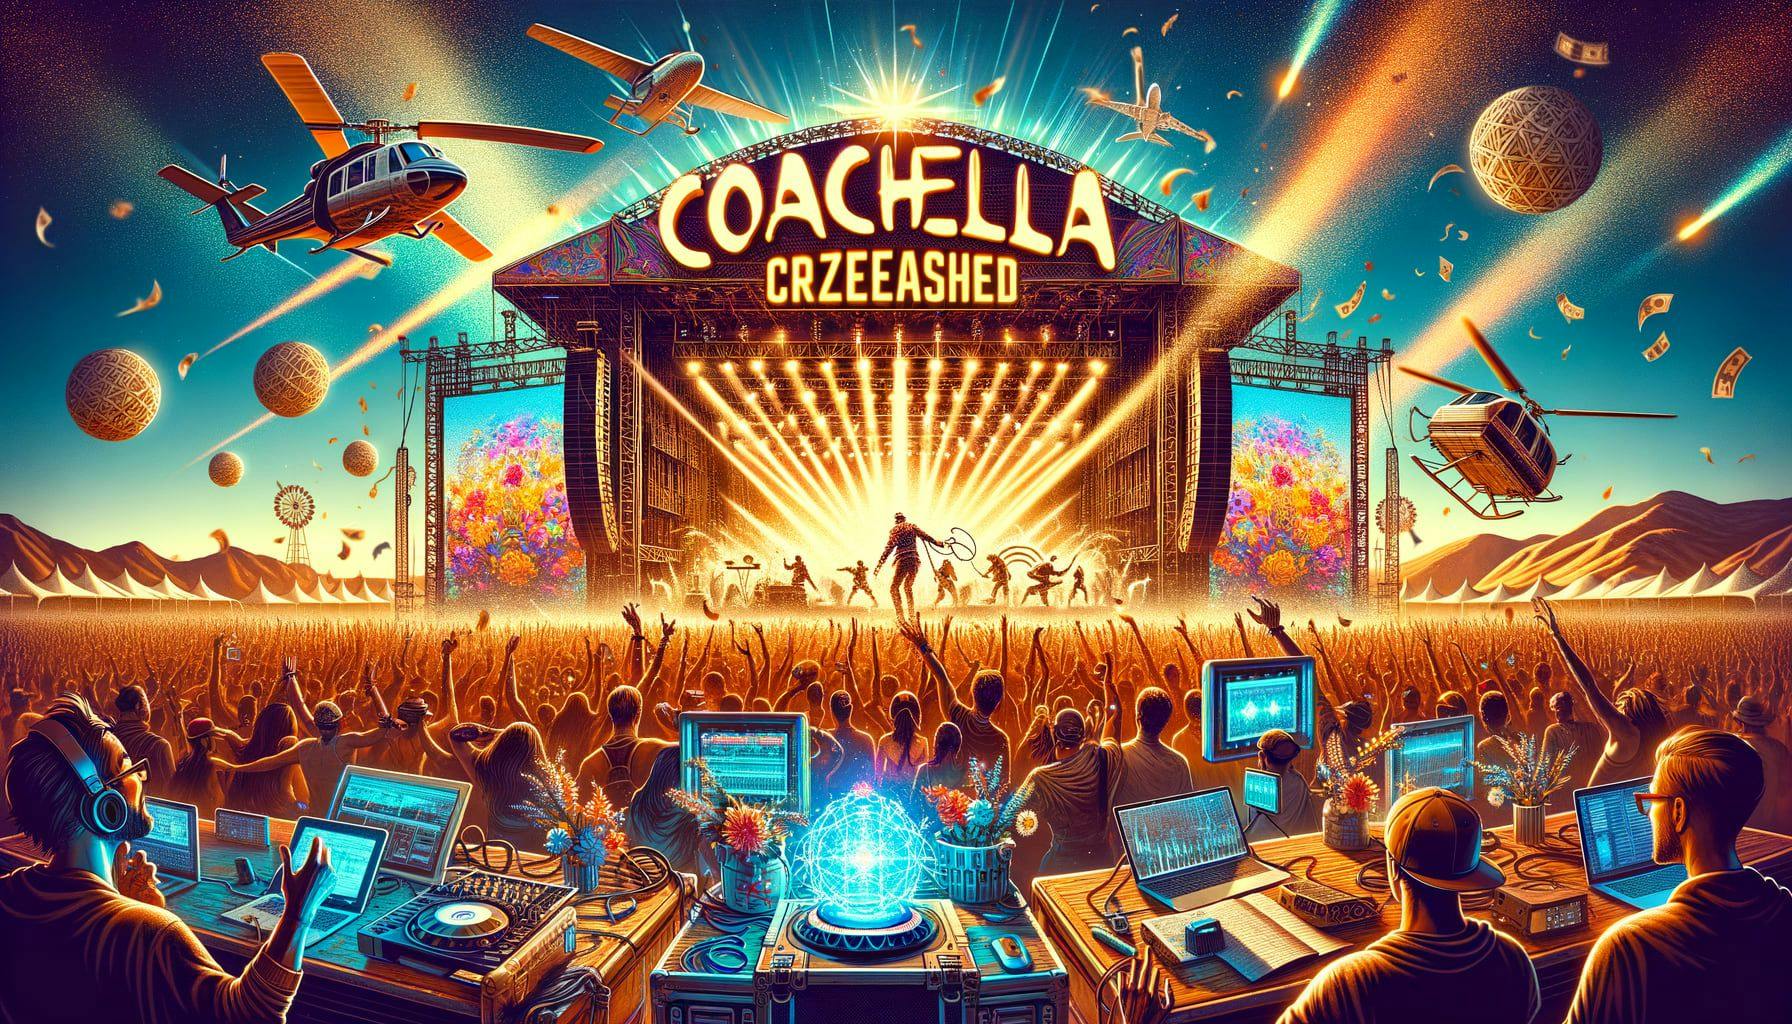 Create a dynamic image illustrating the energetic atmosphere of the famous Coachella music festival. It should depict scenes of exciting performances, shocked audiences and technical setups, with a surprise guest walking onto the stage, bringing a feeling of anticipation. Also incorporate elements that give a sense of virtual reality, adding an additional layer of modernity and tech-forward approach. The stage lights, festival crowd, music gear and swirling dust all catch the afternoon sun in high contrast. The image should be in a 16:9 ratio and have 1792 pixels, and overlay the headline 'CoachellaCrazeUnleashed' across the top in bold vibrant colors.